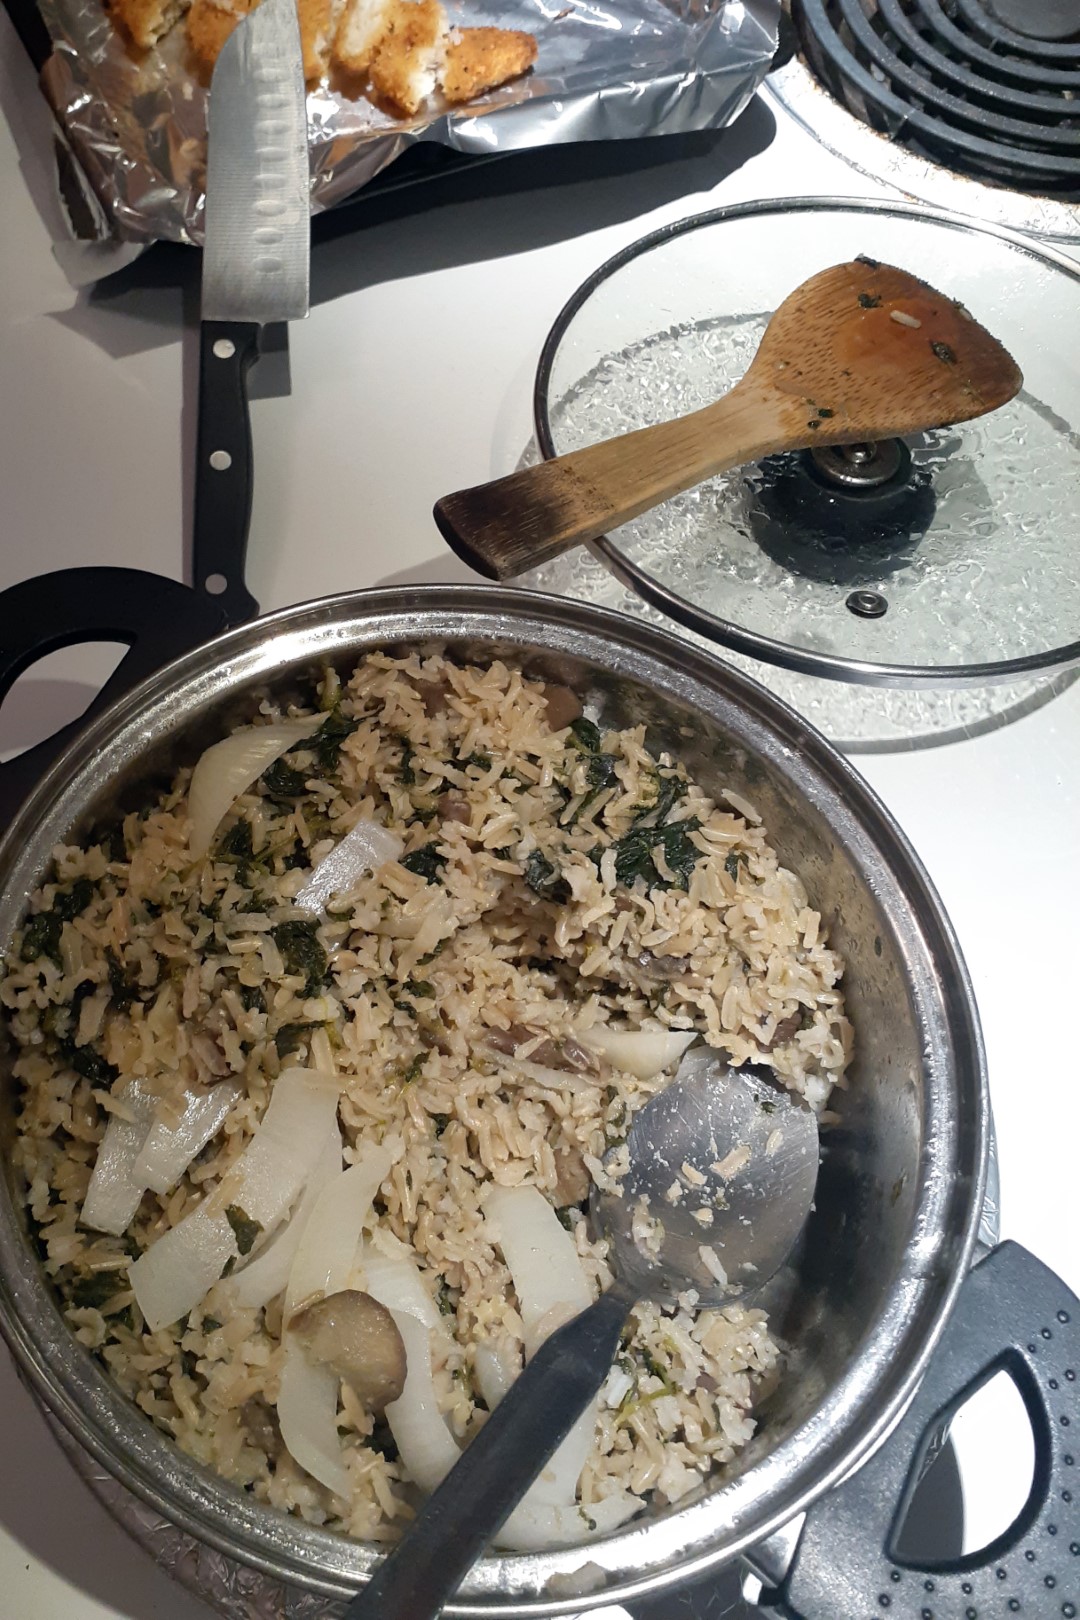 My typical twenty-minute one-pot rice with Chinese eggplant, spinach and baked fish